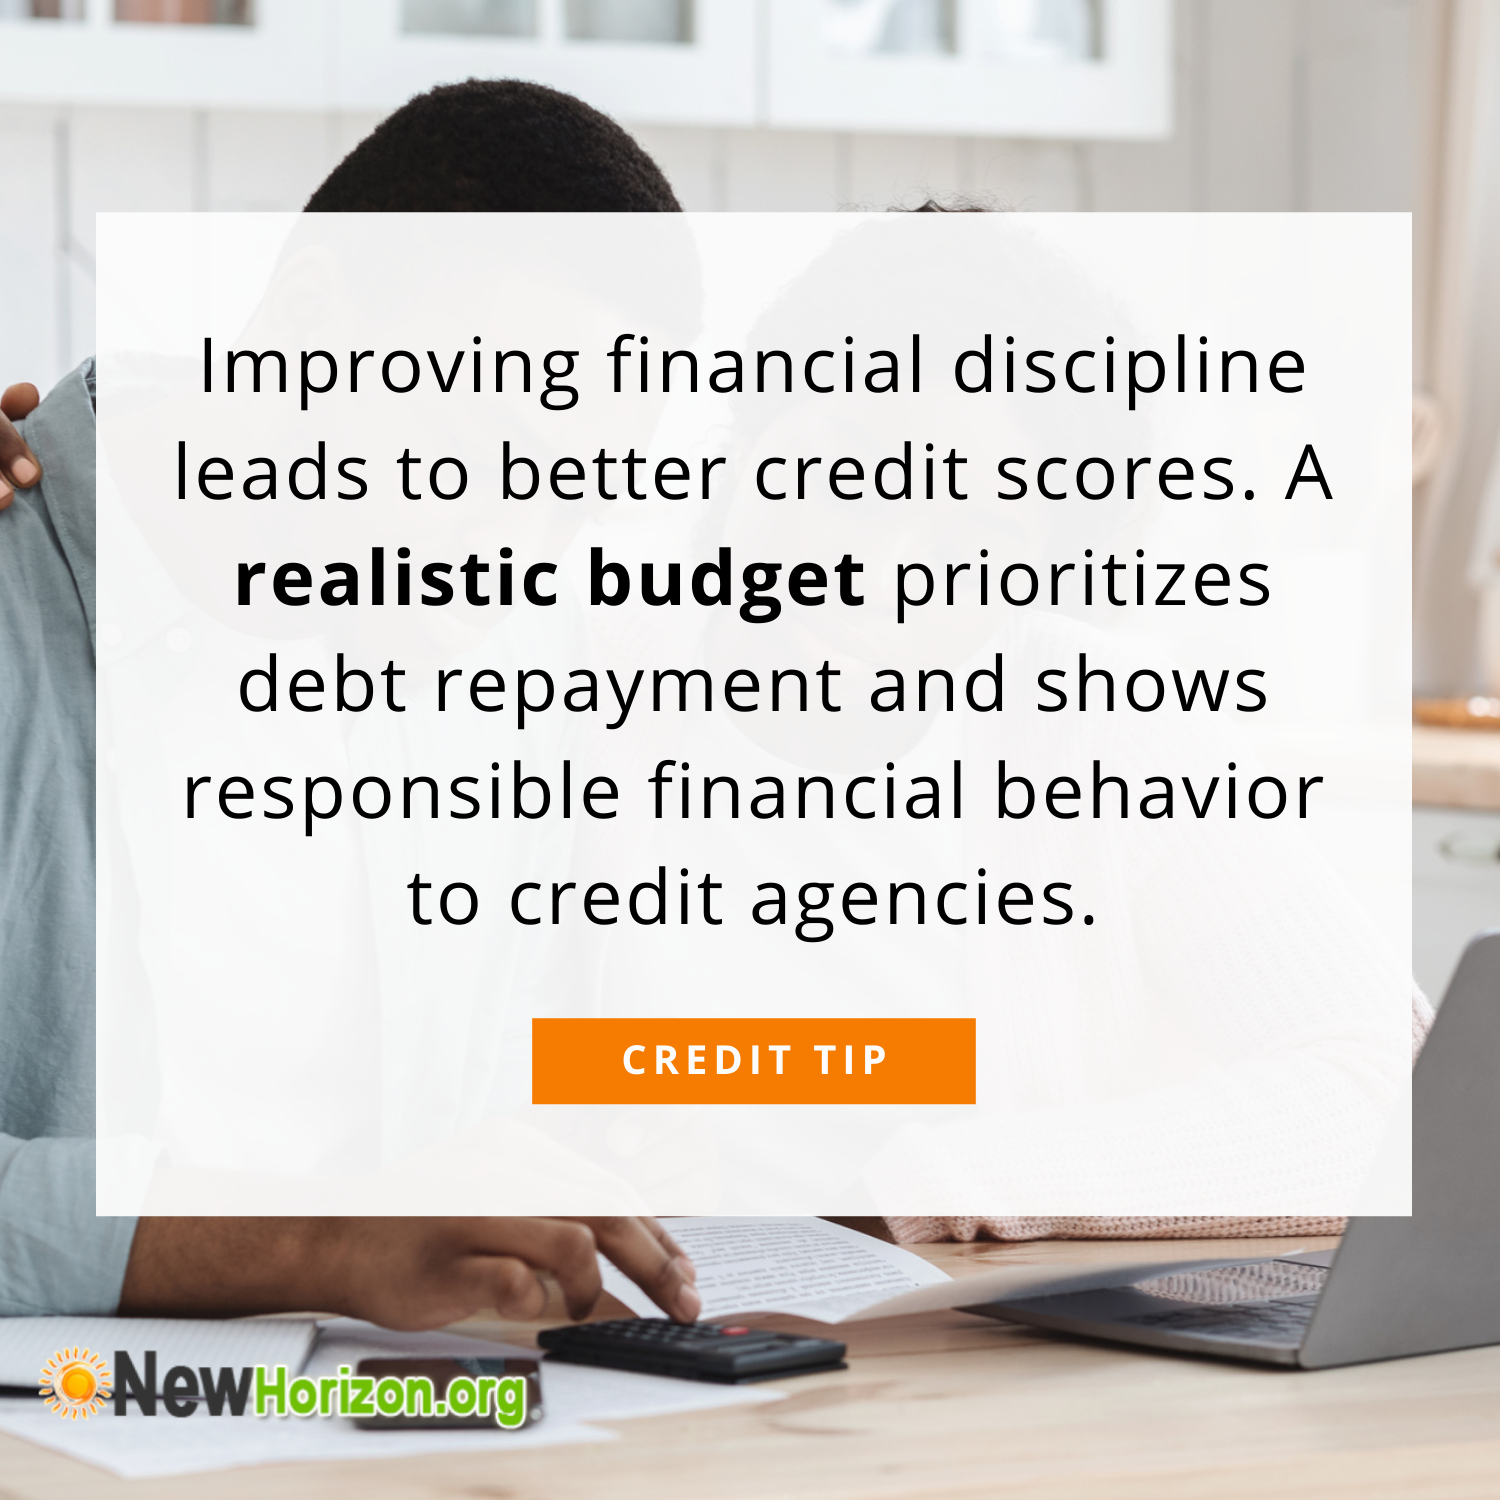 A realistic budget prioritizes debt repayment and shows responsible financial behavior to credit agencies